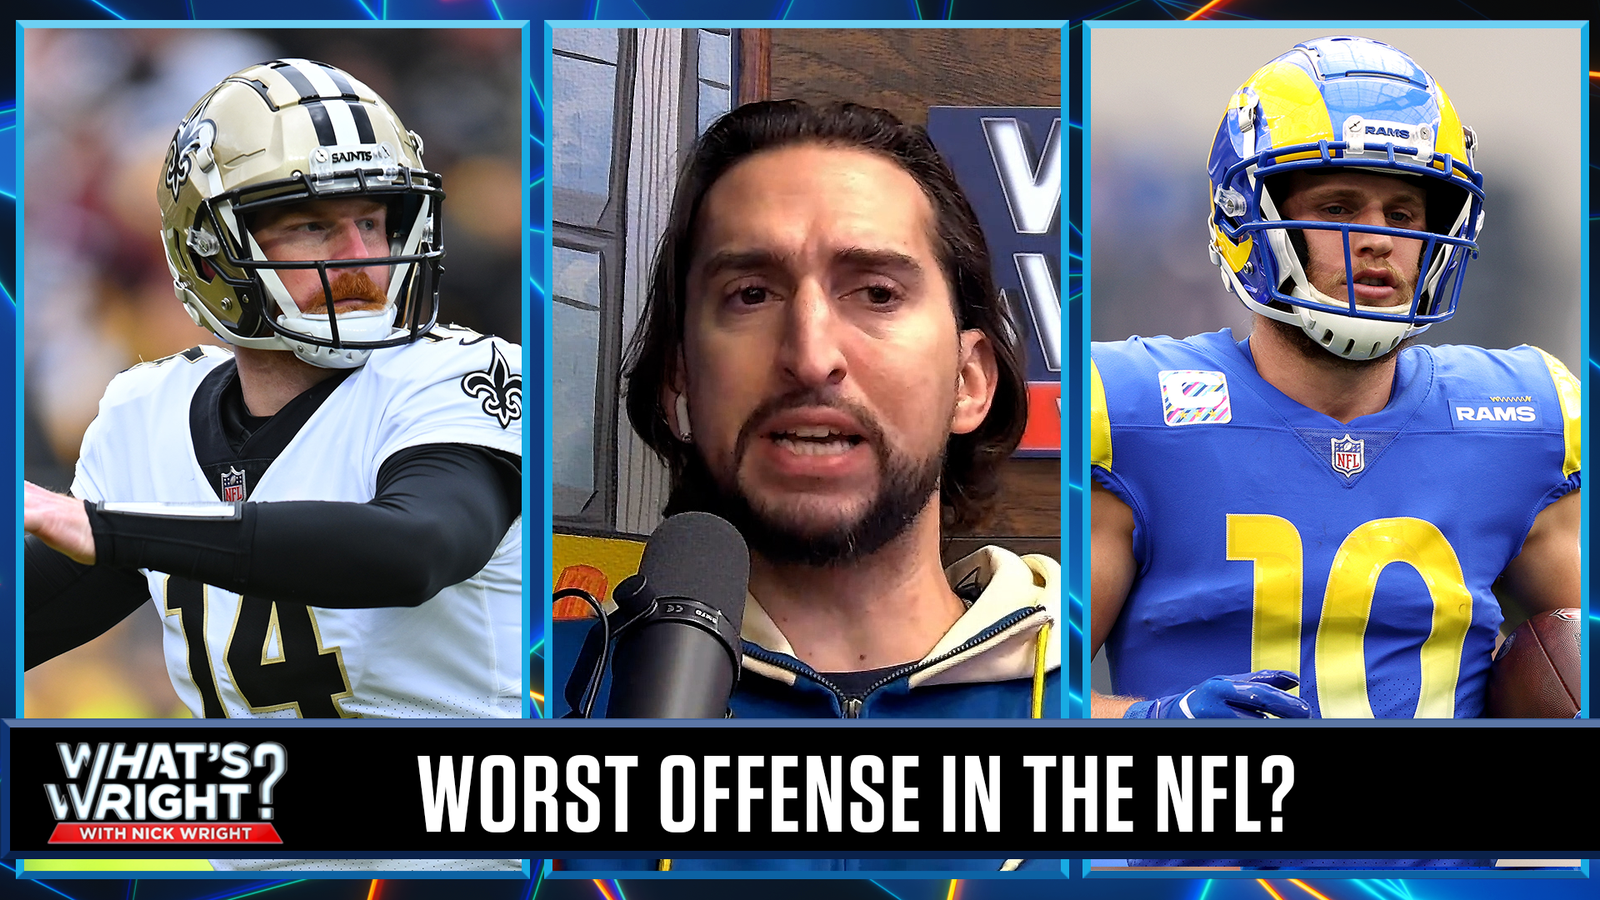 Dothe Rams have the worst offense in the NFL?